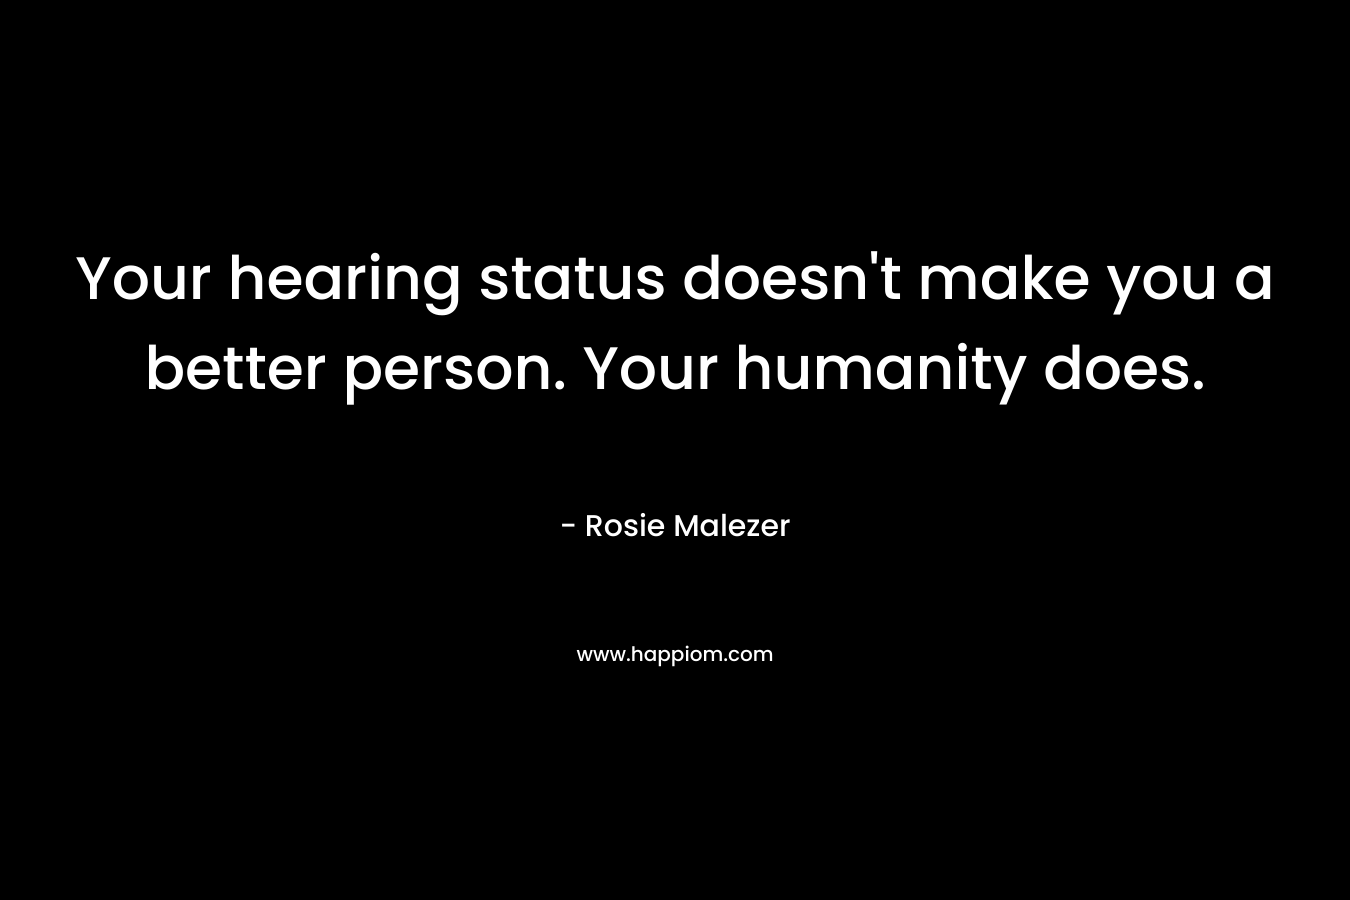 Your hearing status doesn’t make you a better person. Your humanity does. – Rosie Malezer